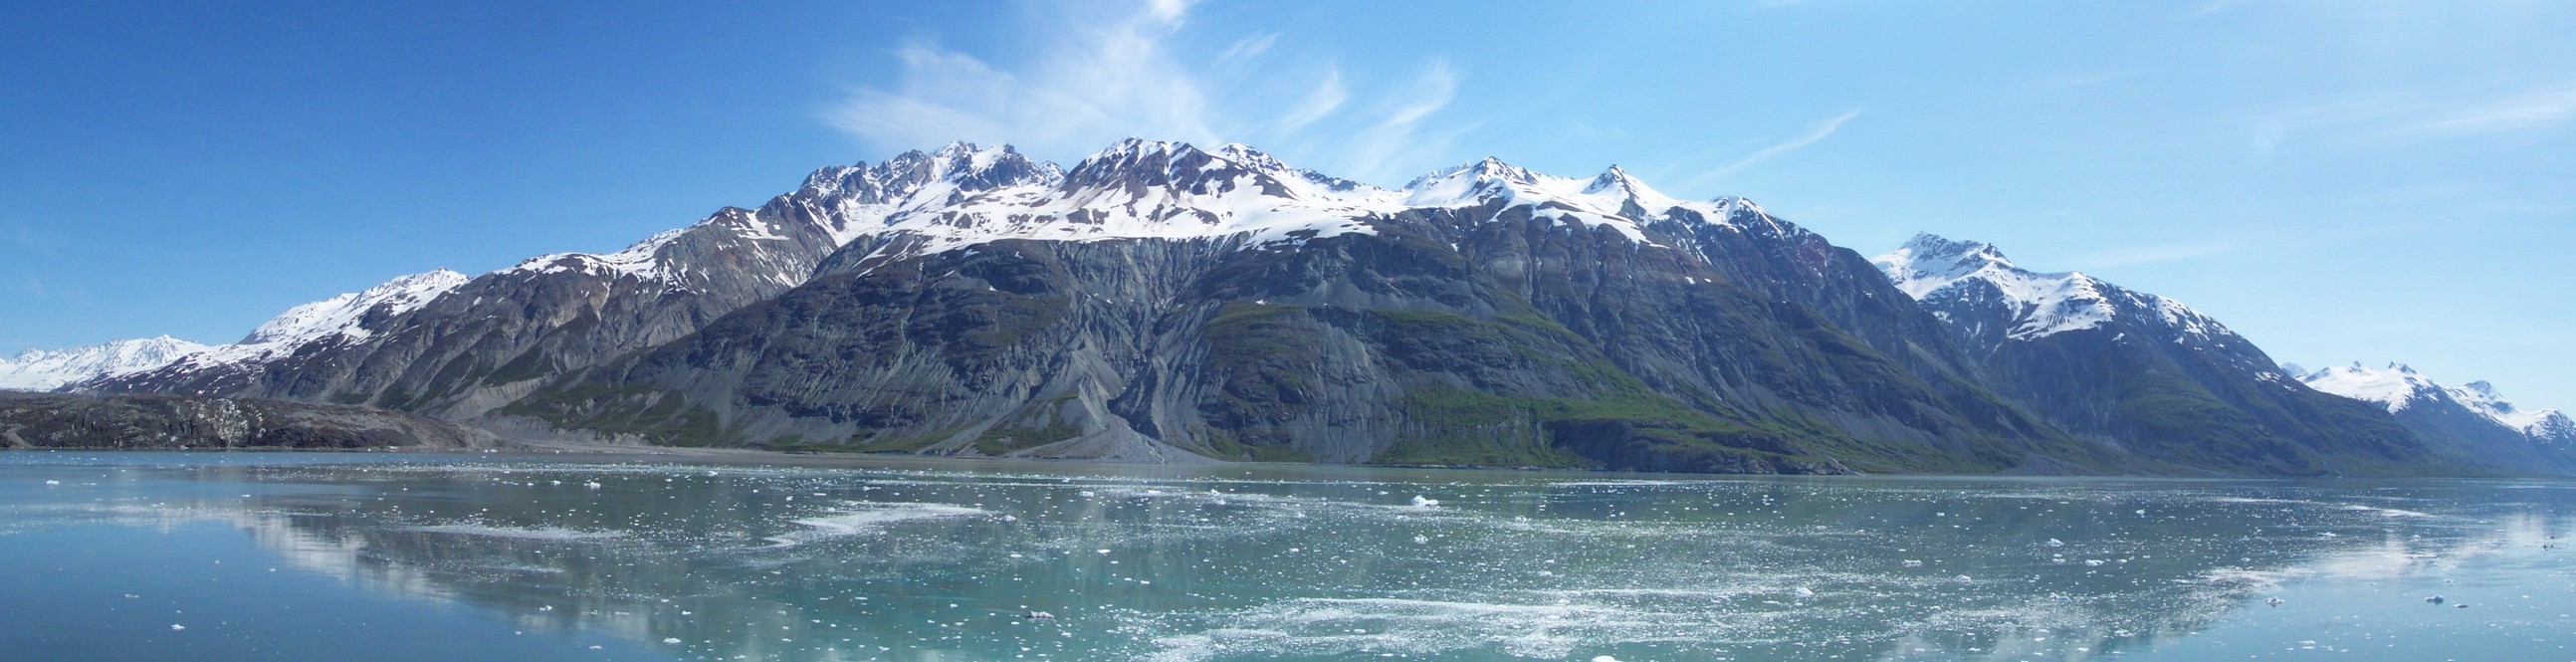 pano19_mountains_by_grand_pacific_glacier_panoramic_180.jpg